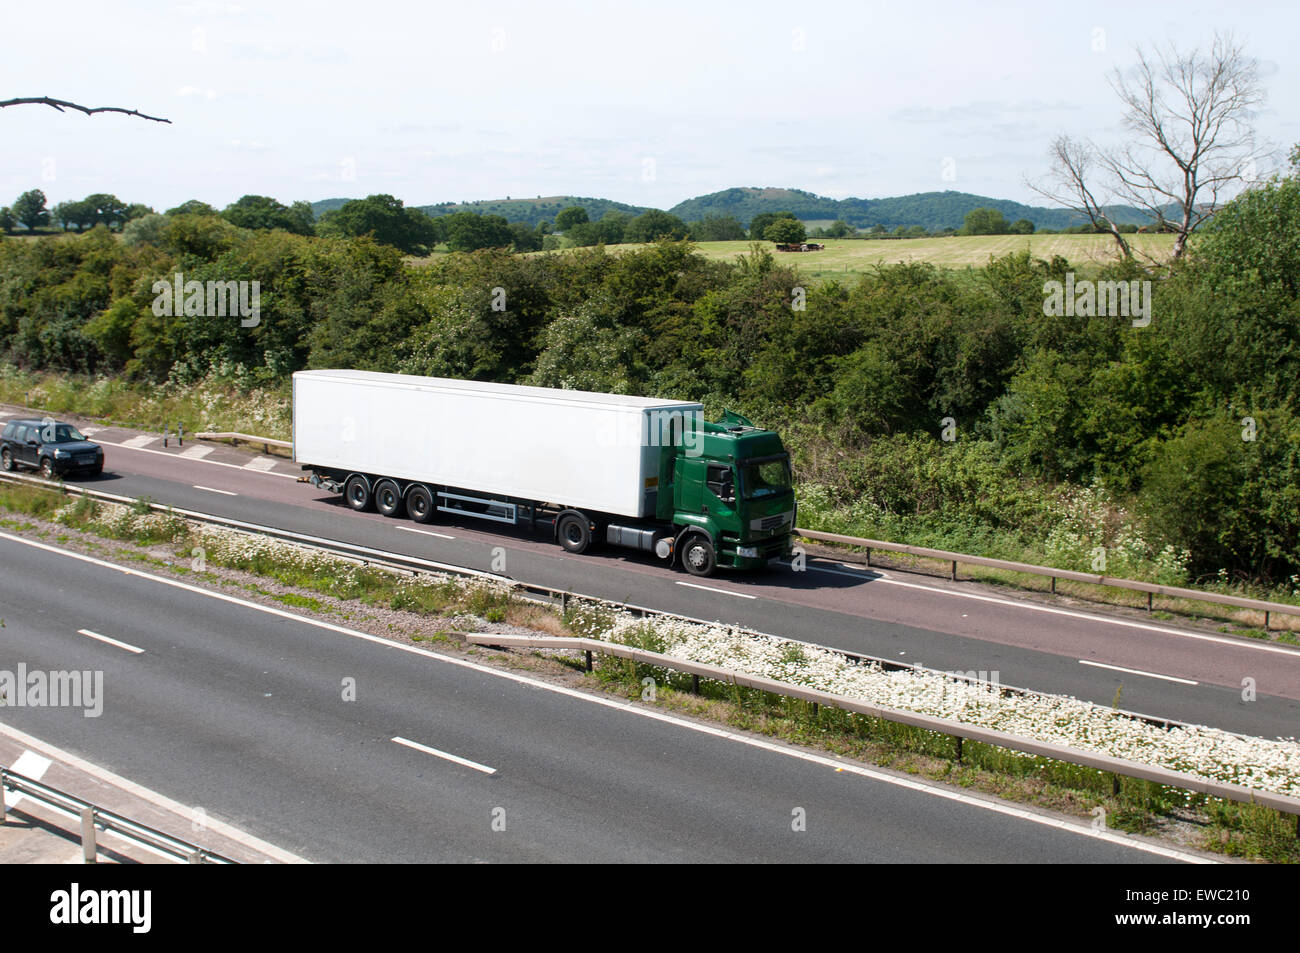 Articulated lorry on the M50 motorway, Worcestershire, England, UK Stock Photo